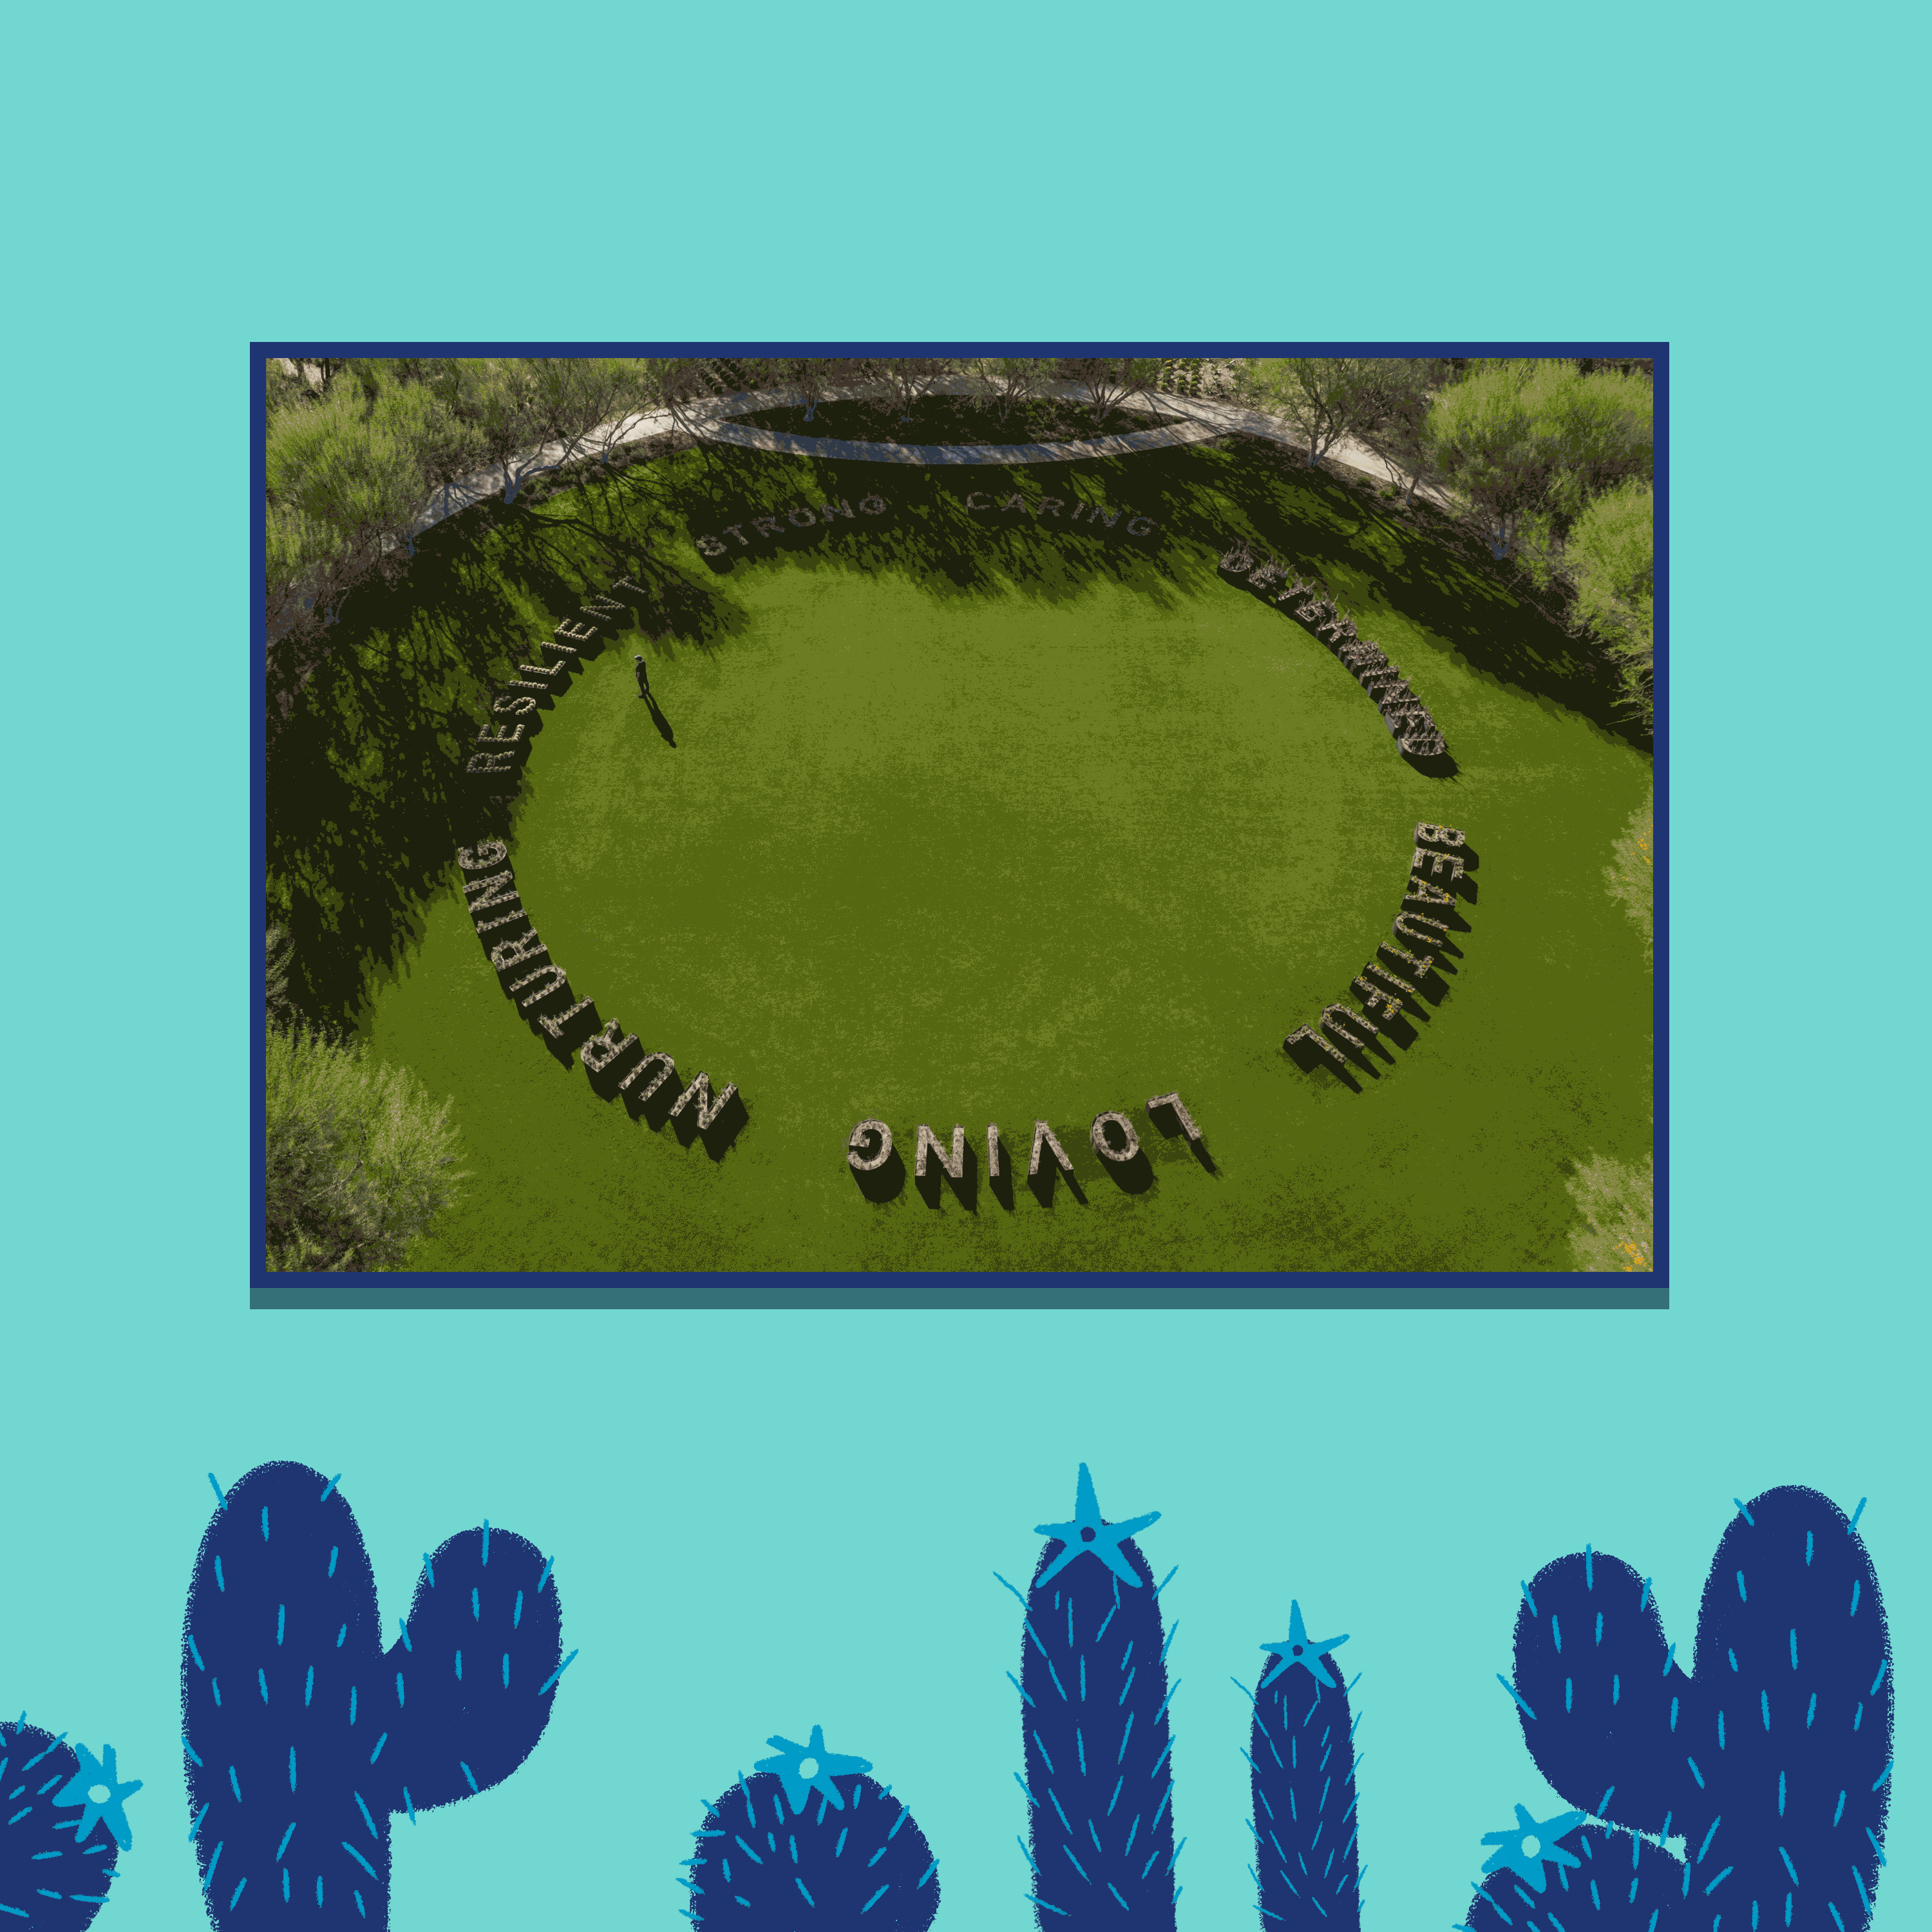 An illustration with cactuses contains a GIF shows with images of outdoor artwork.